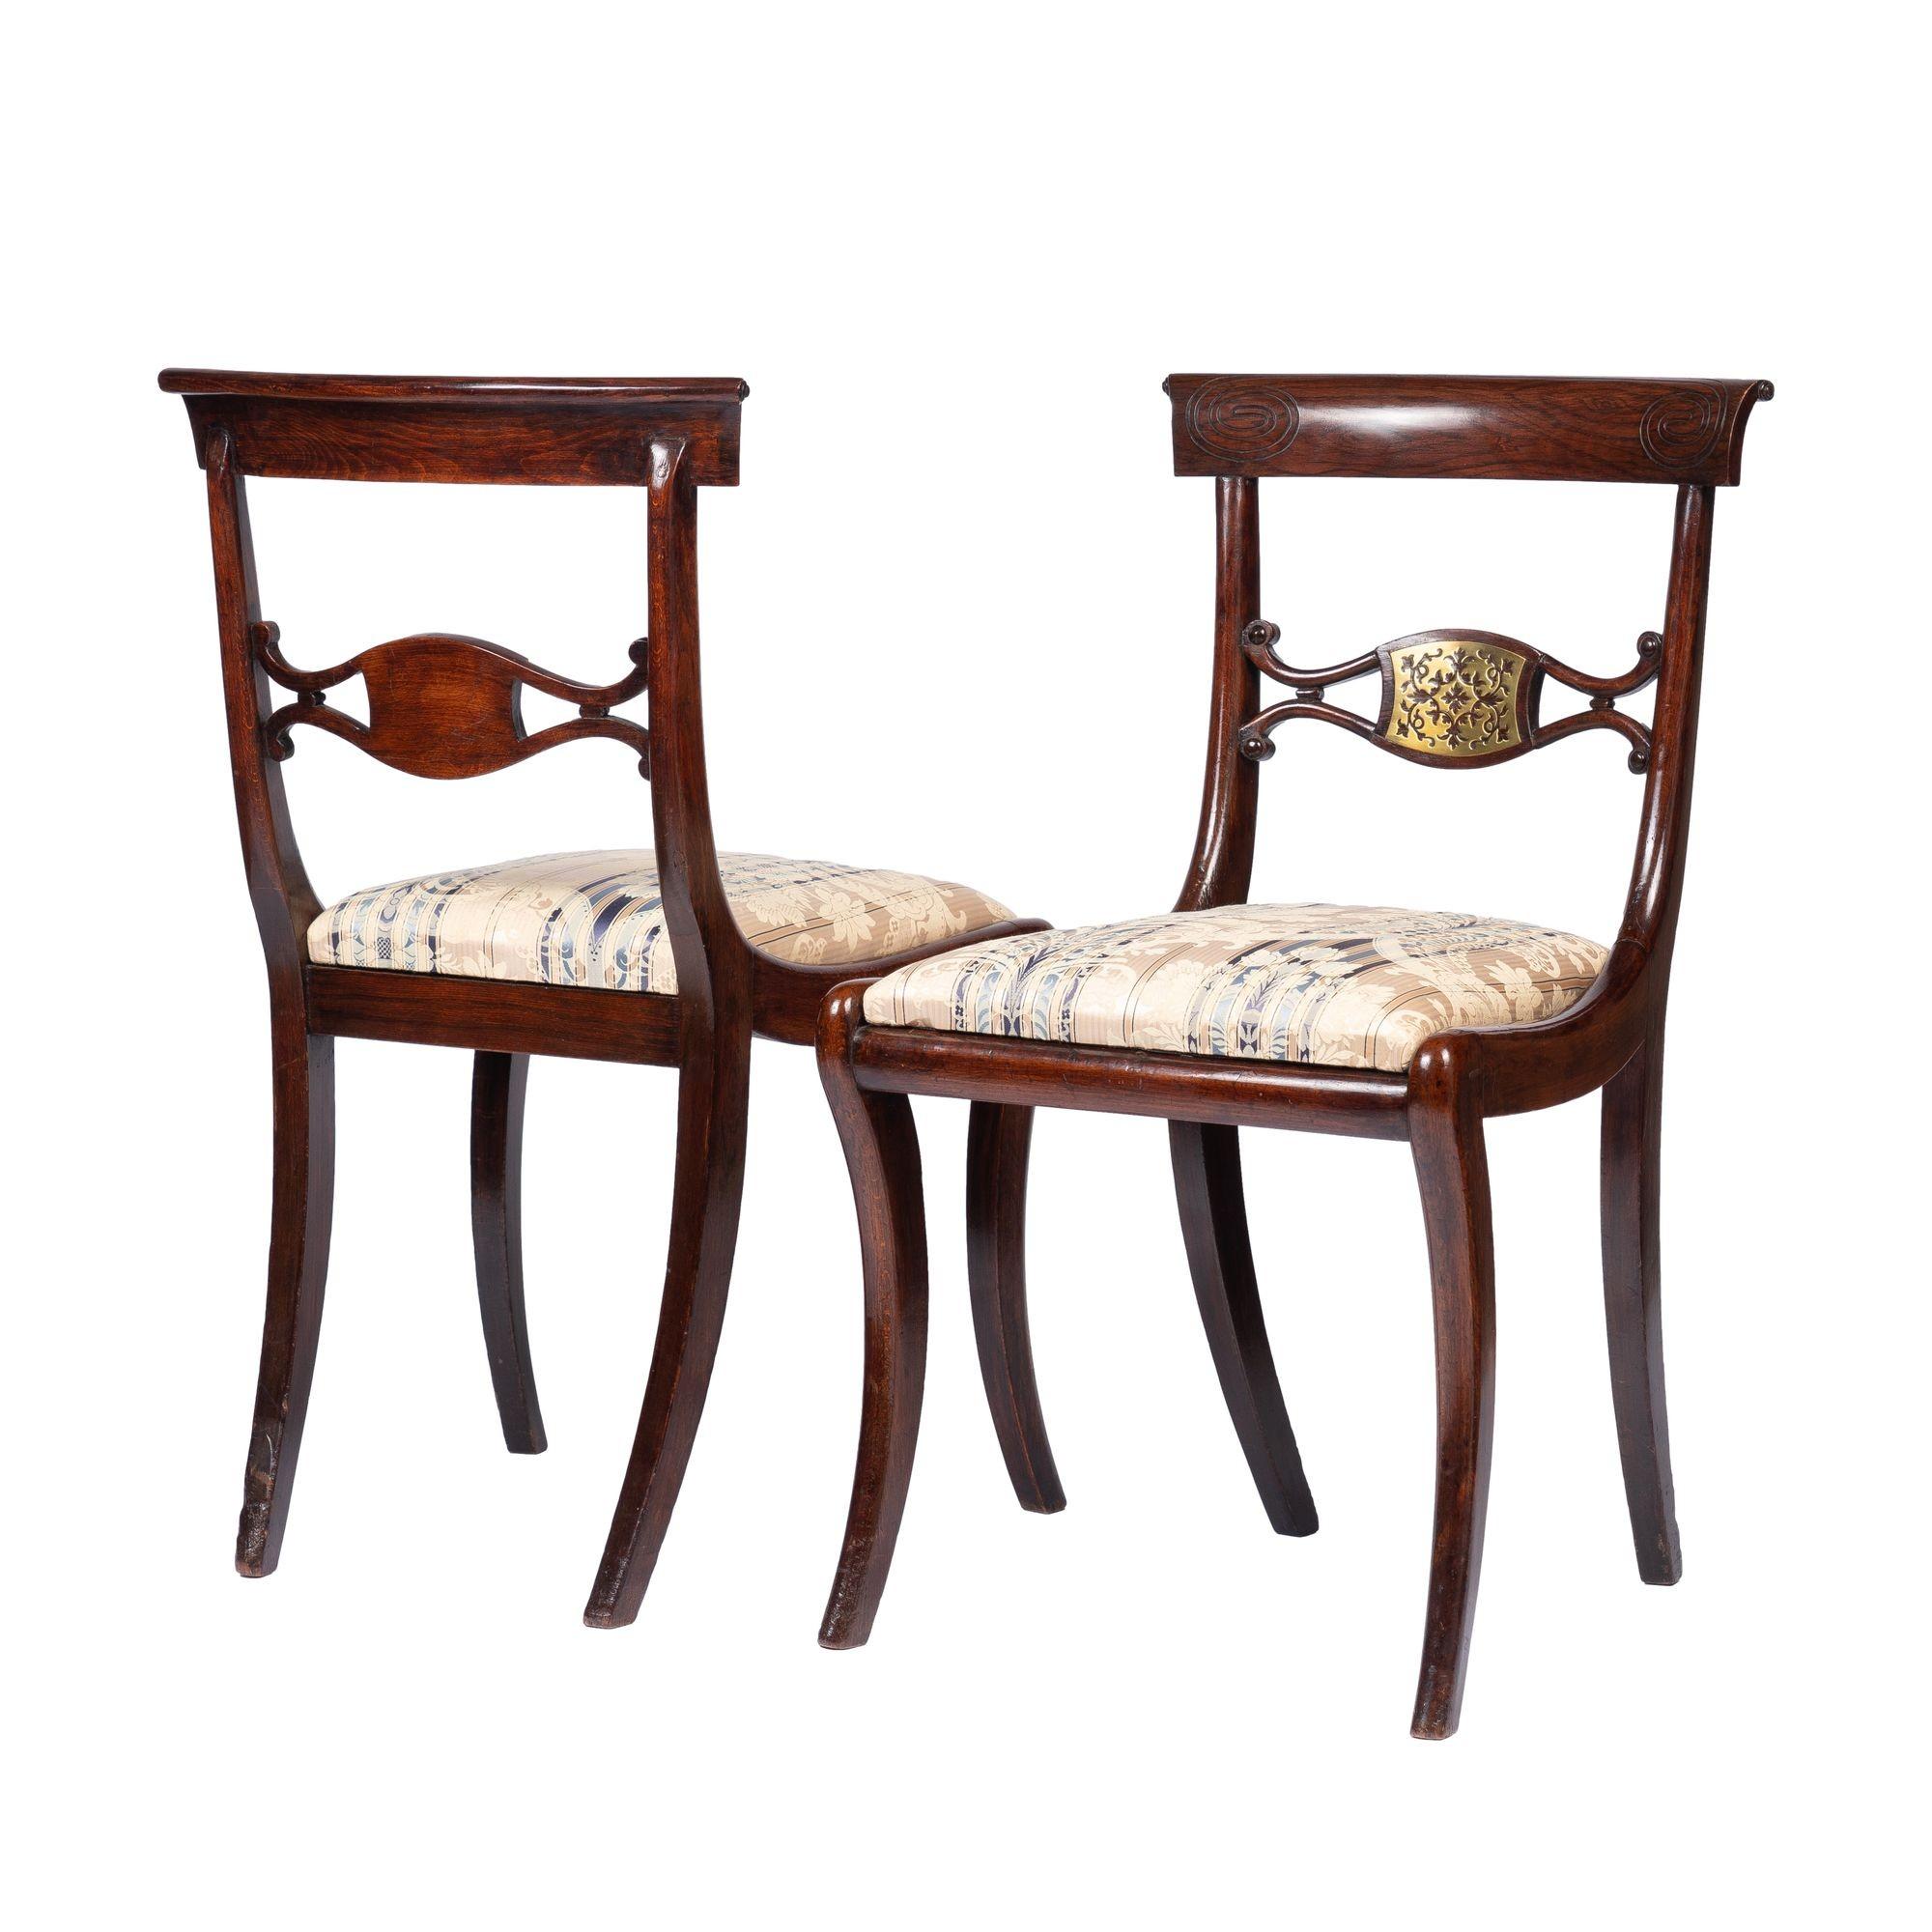 Pair of English Regency Period faux rosewood painted beechwood Klismos side chairs inlaid with pierced brass embellishments on the center of the back rail and the corners of the crest rail. The chairs are fitted with upholstered slip seats on fine